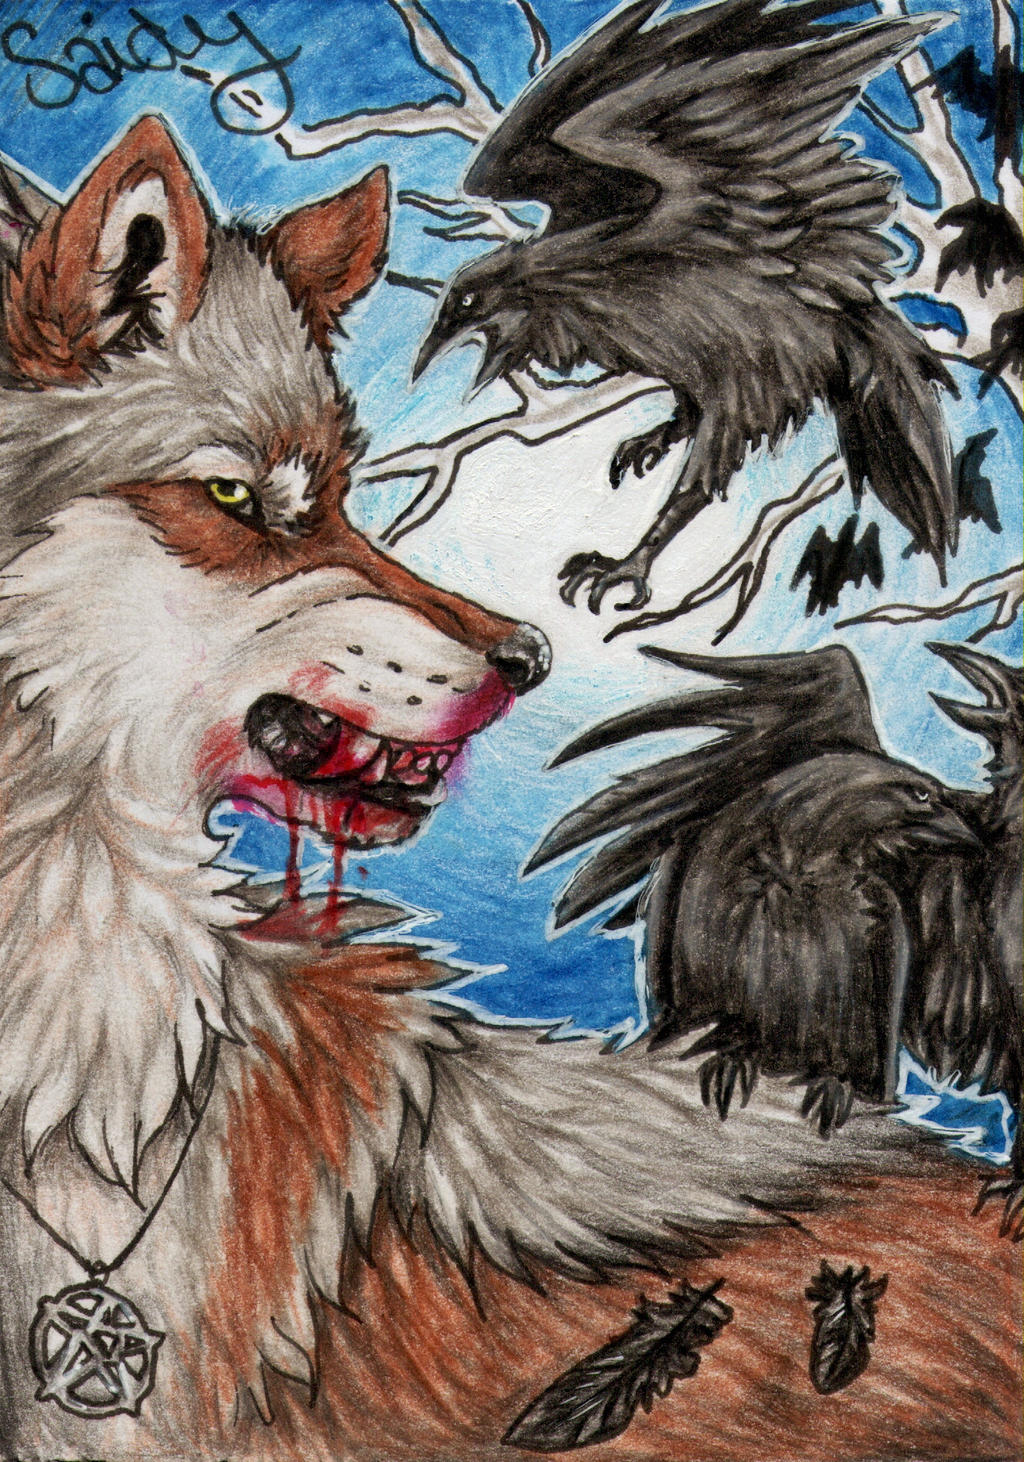 ACEO #28: Into the Woods